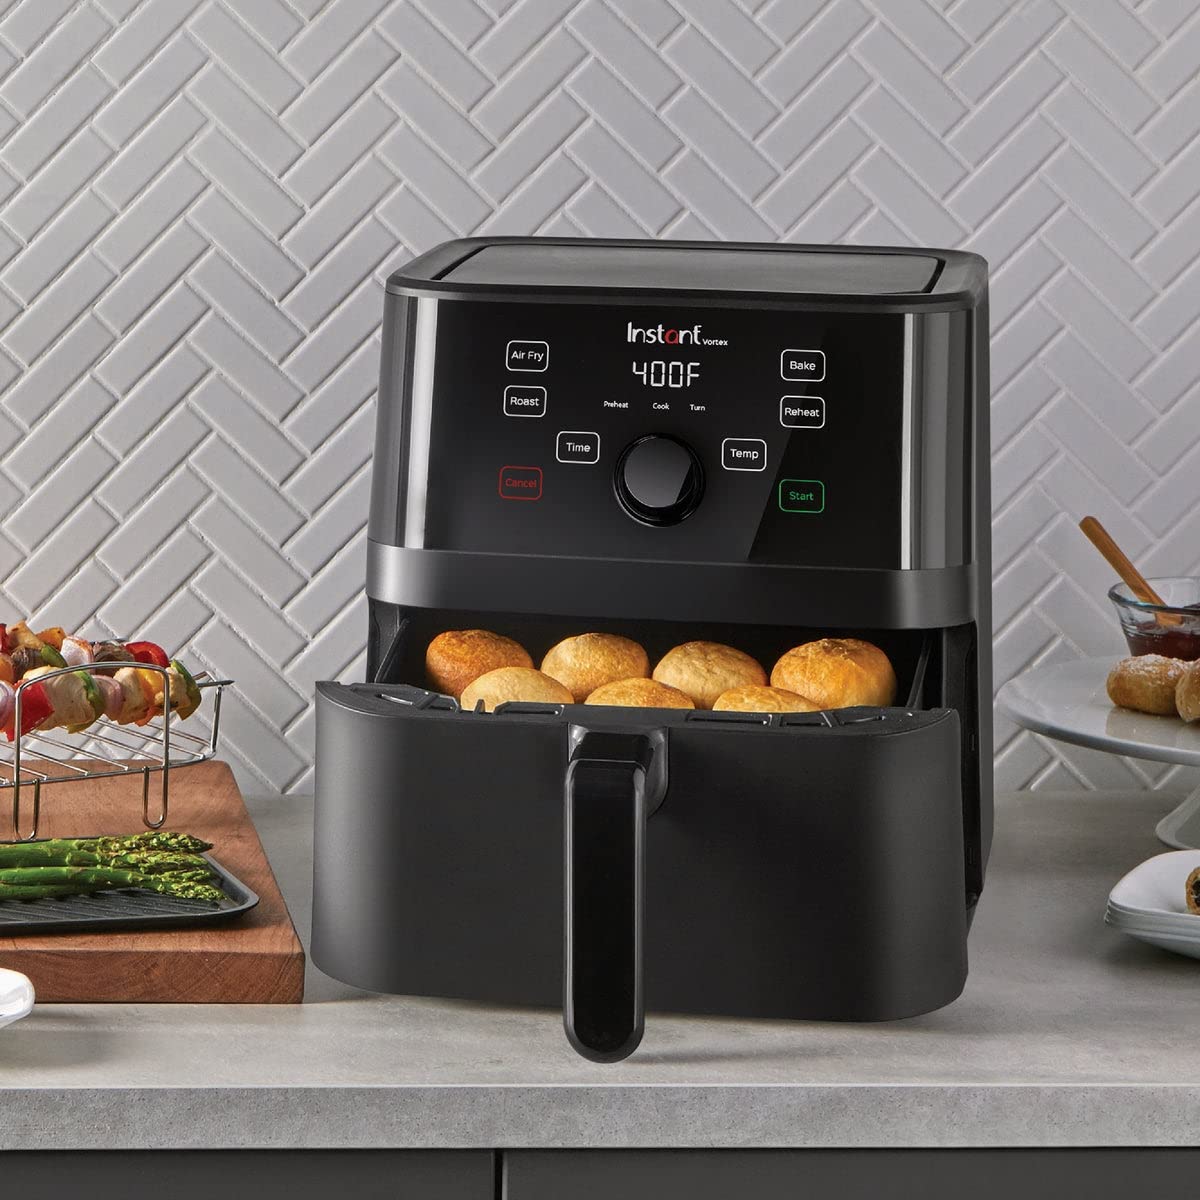 Instant Vortex 5.7QT Air Fryer, Custom Program Options, 4-in-1 Functions, EvenCrisp Technology that Crisps, Roasts, Bakes and Reheats, 100+ In-App Recipes, from the Makers of Instant Pot, Black